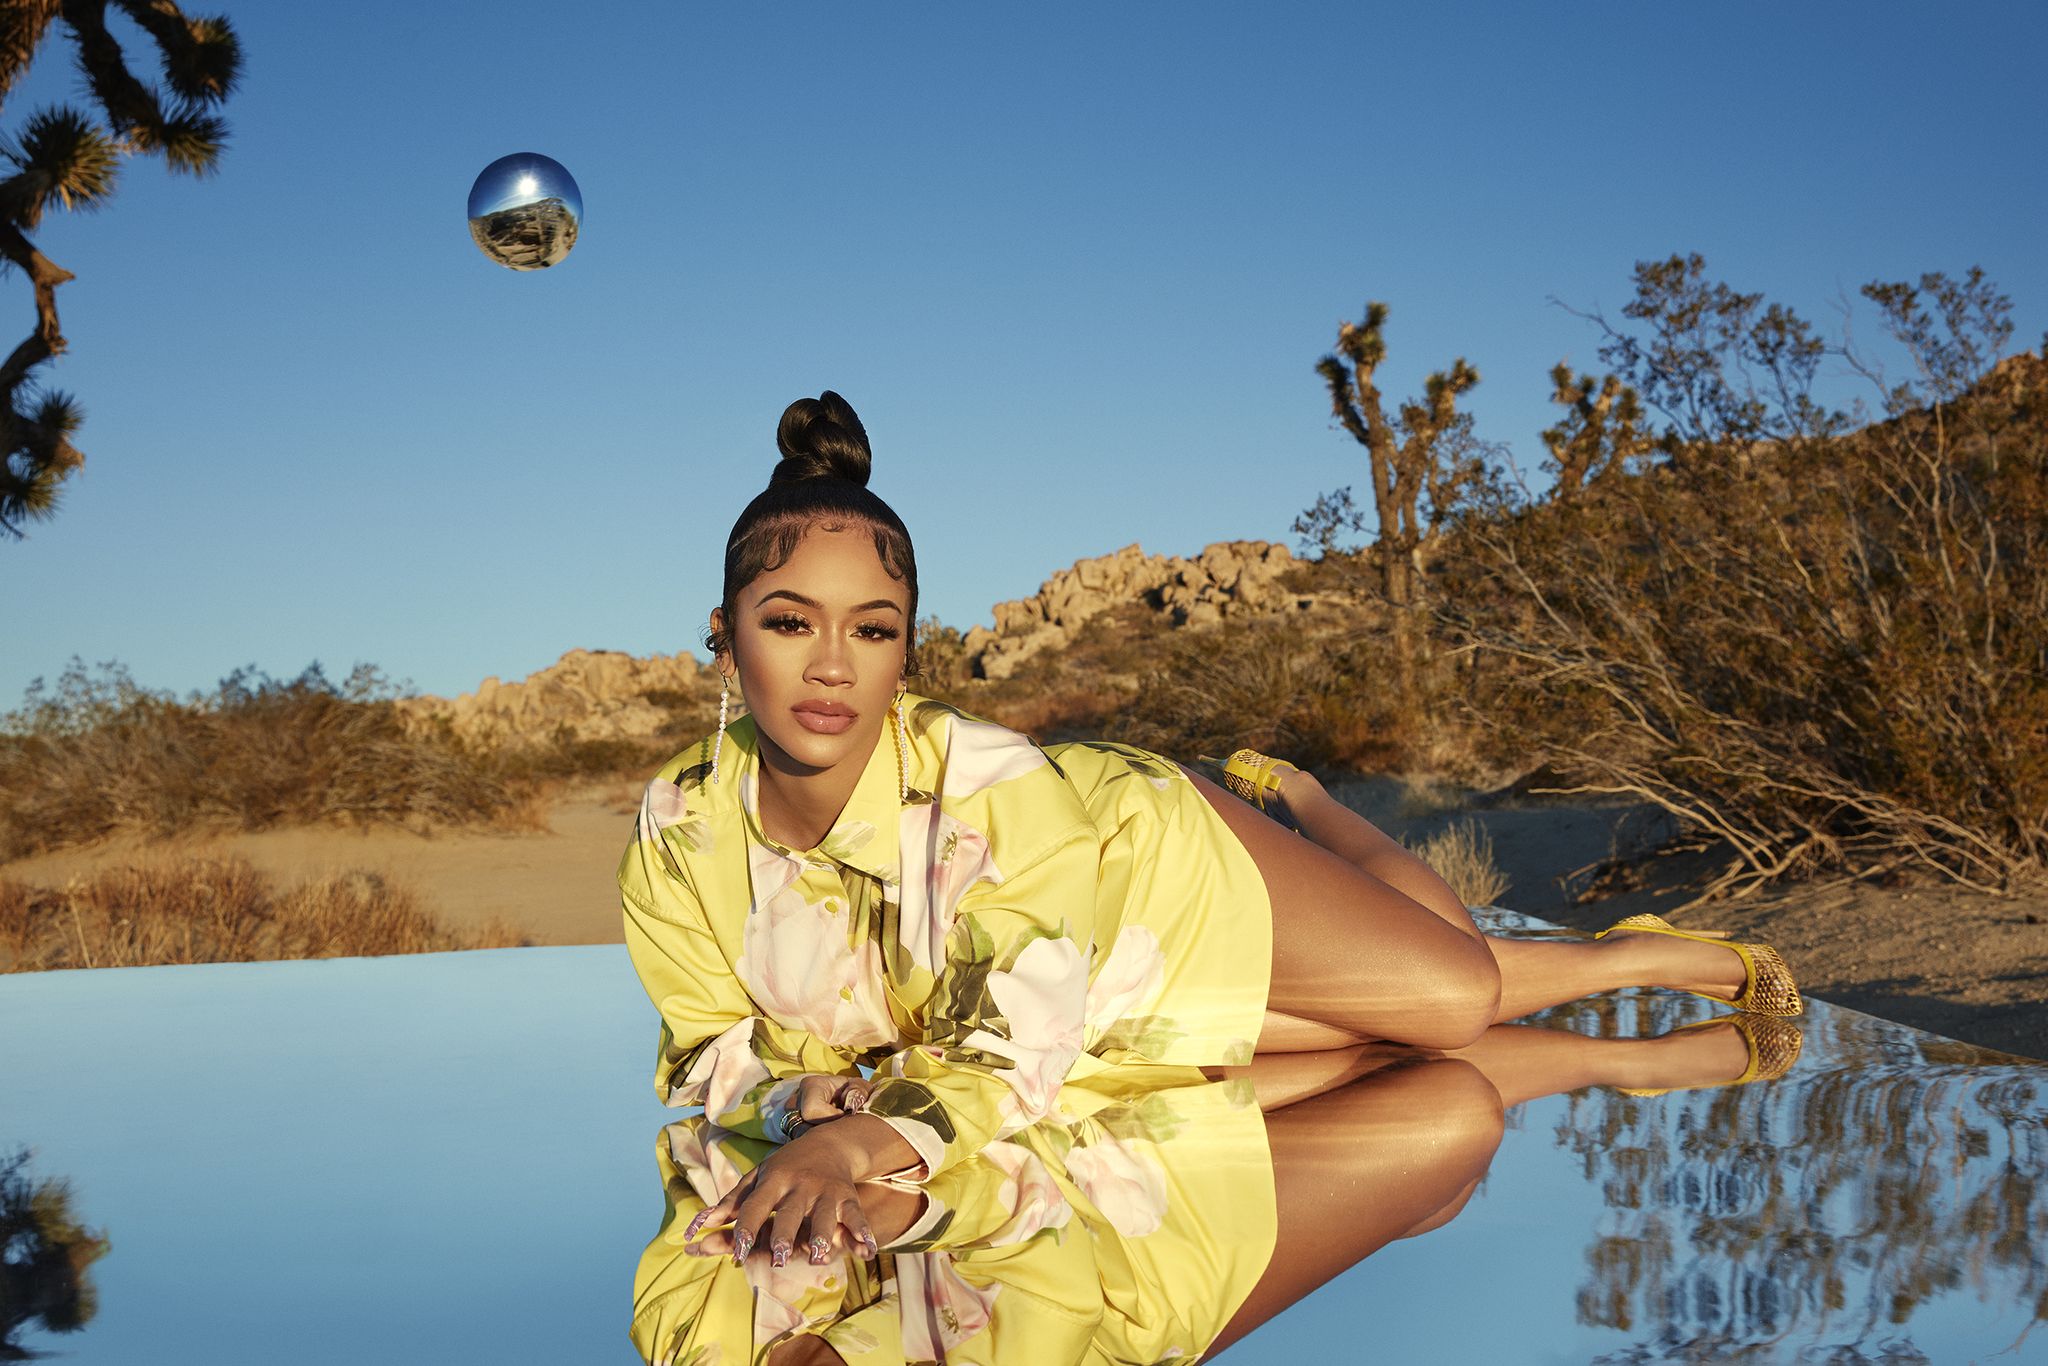 singer saweetie lying down on top of a large reflective mirror, wearing a yellow dress and heels, in front of a desert and sky background with a reflective silver globe in the sky